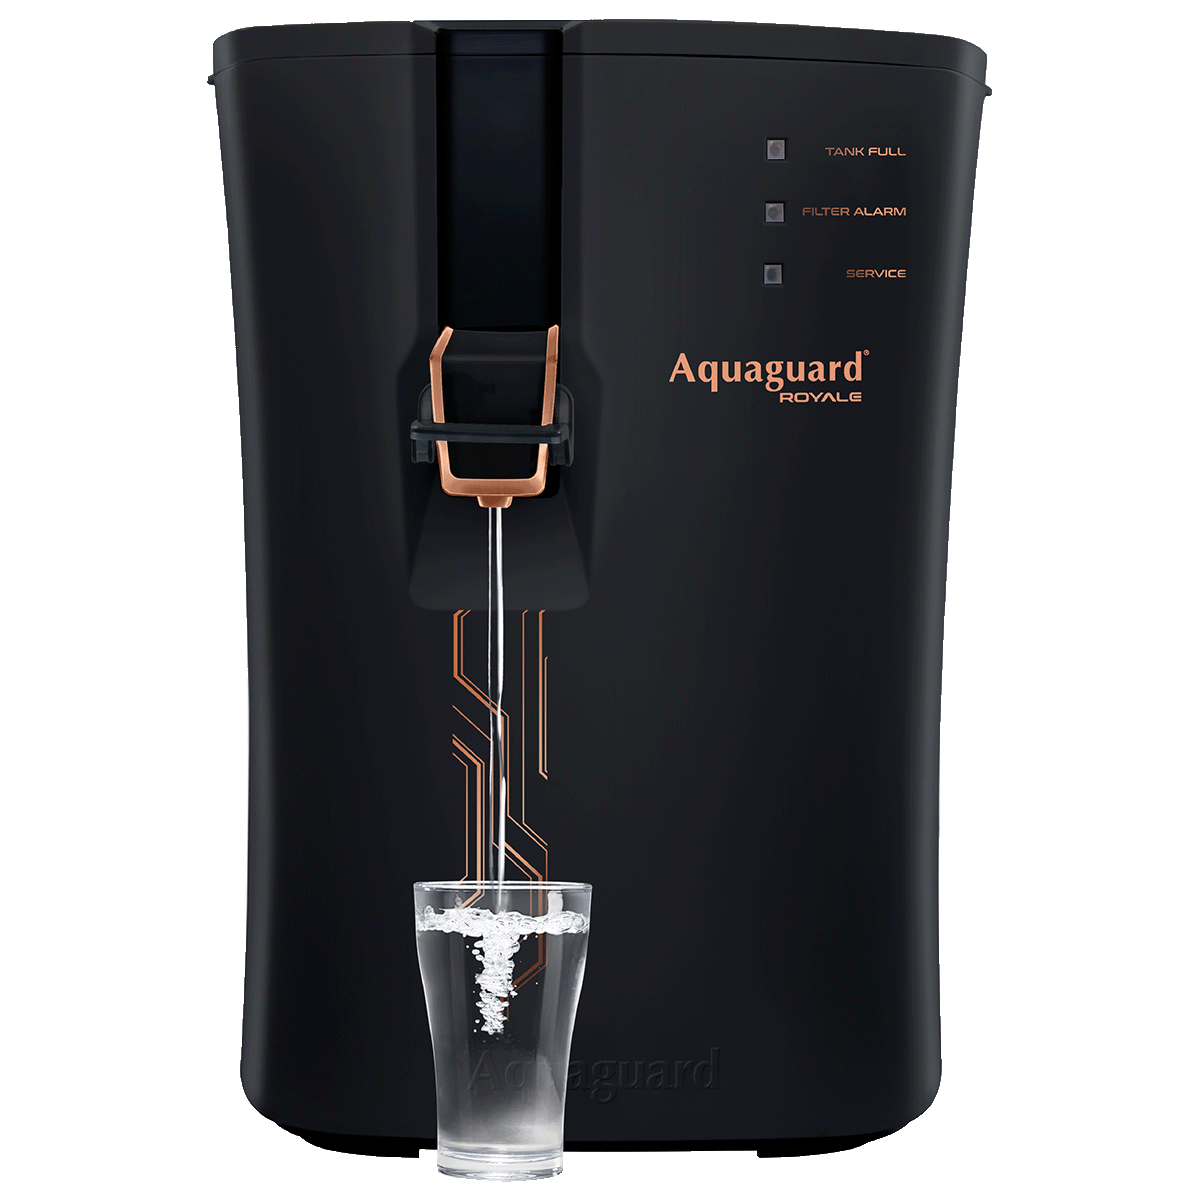 Eureka Forbes Aquaguard Royale RO+UV+MTDS Electrical Water Purifier (Active Copper Technology, Black)_1